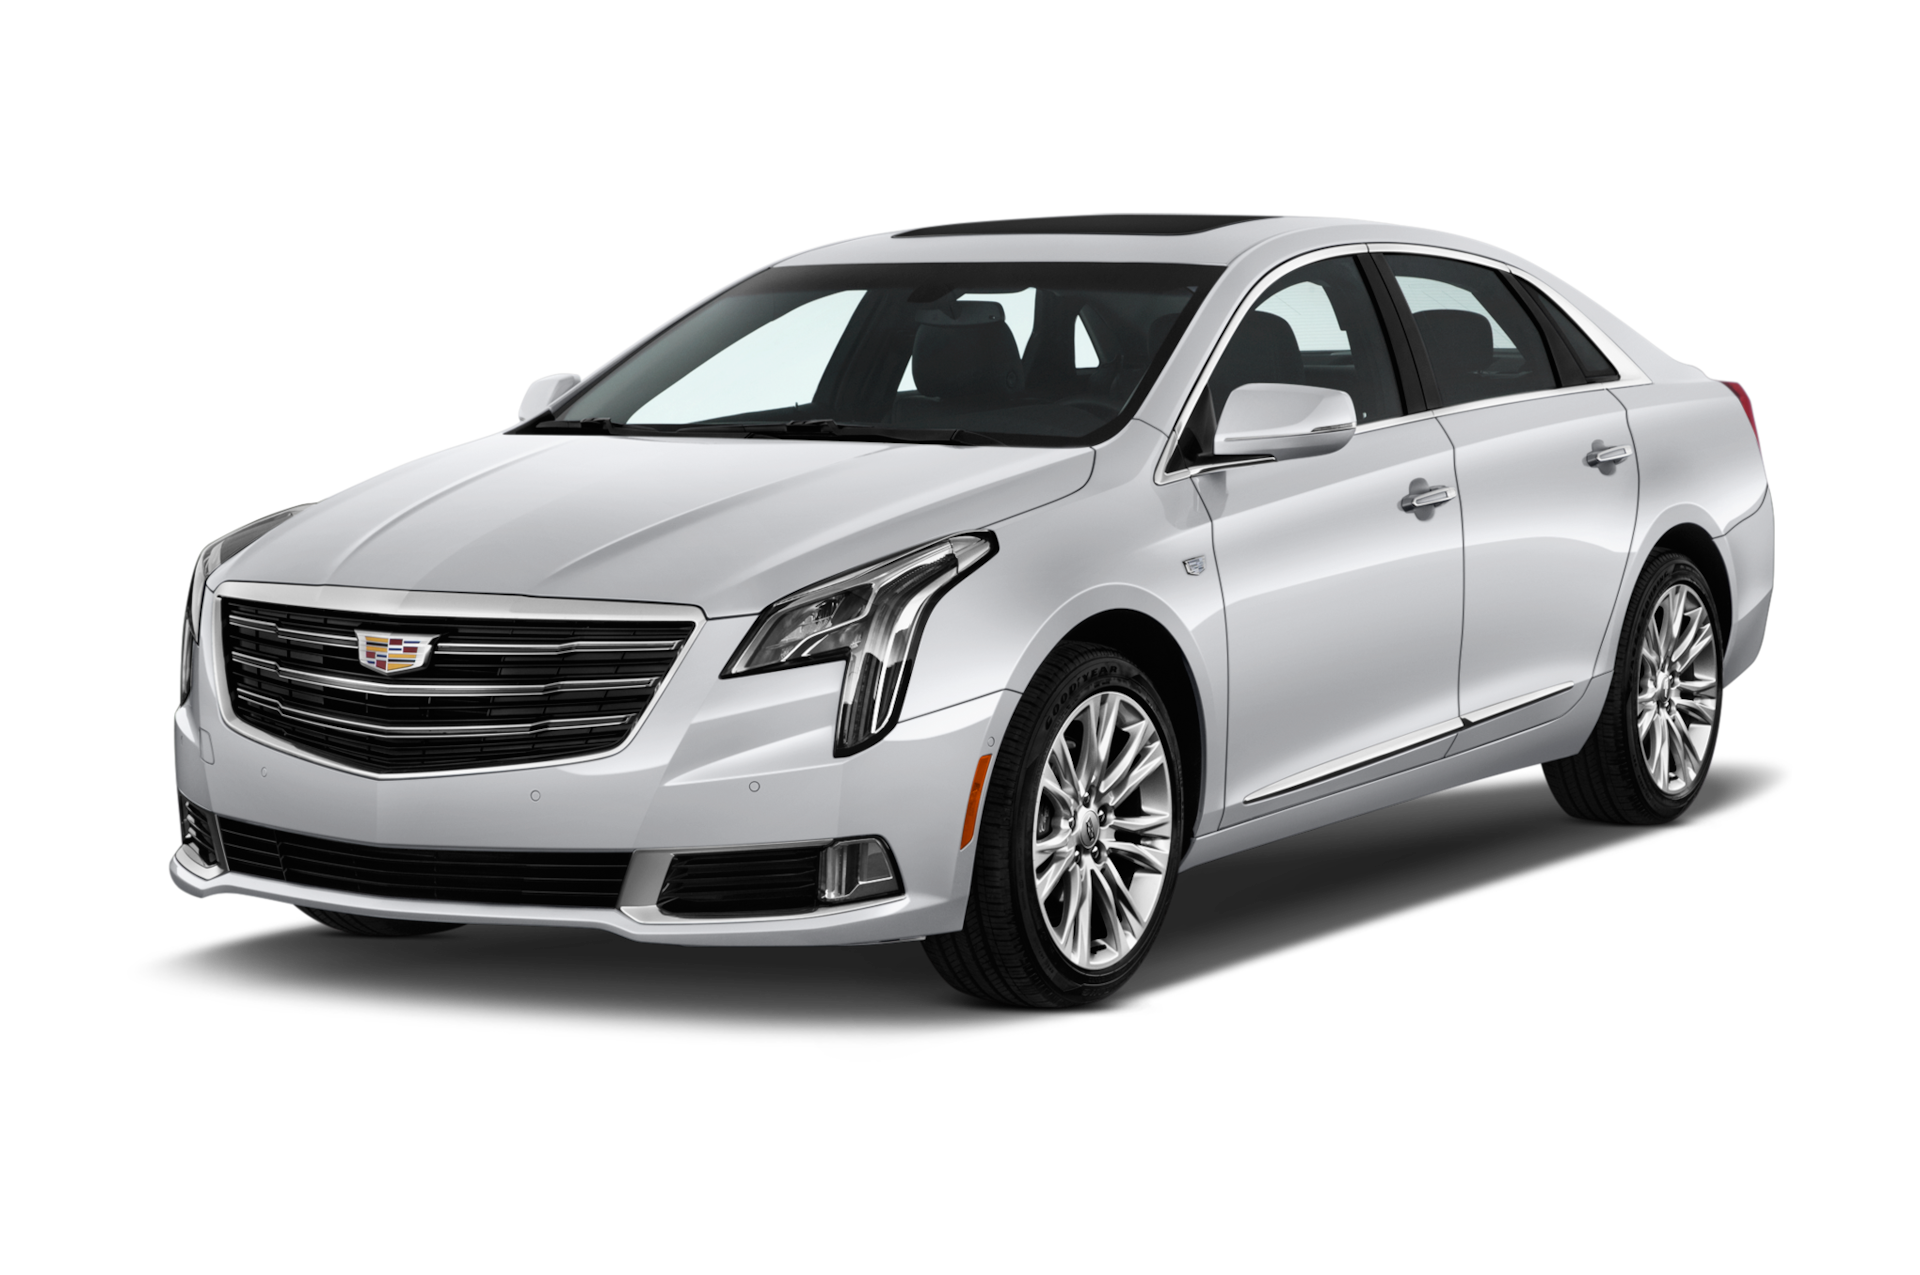 2019 Cadillac XTS Prices, Reviews, and Photos - MotorTrend